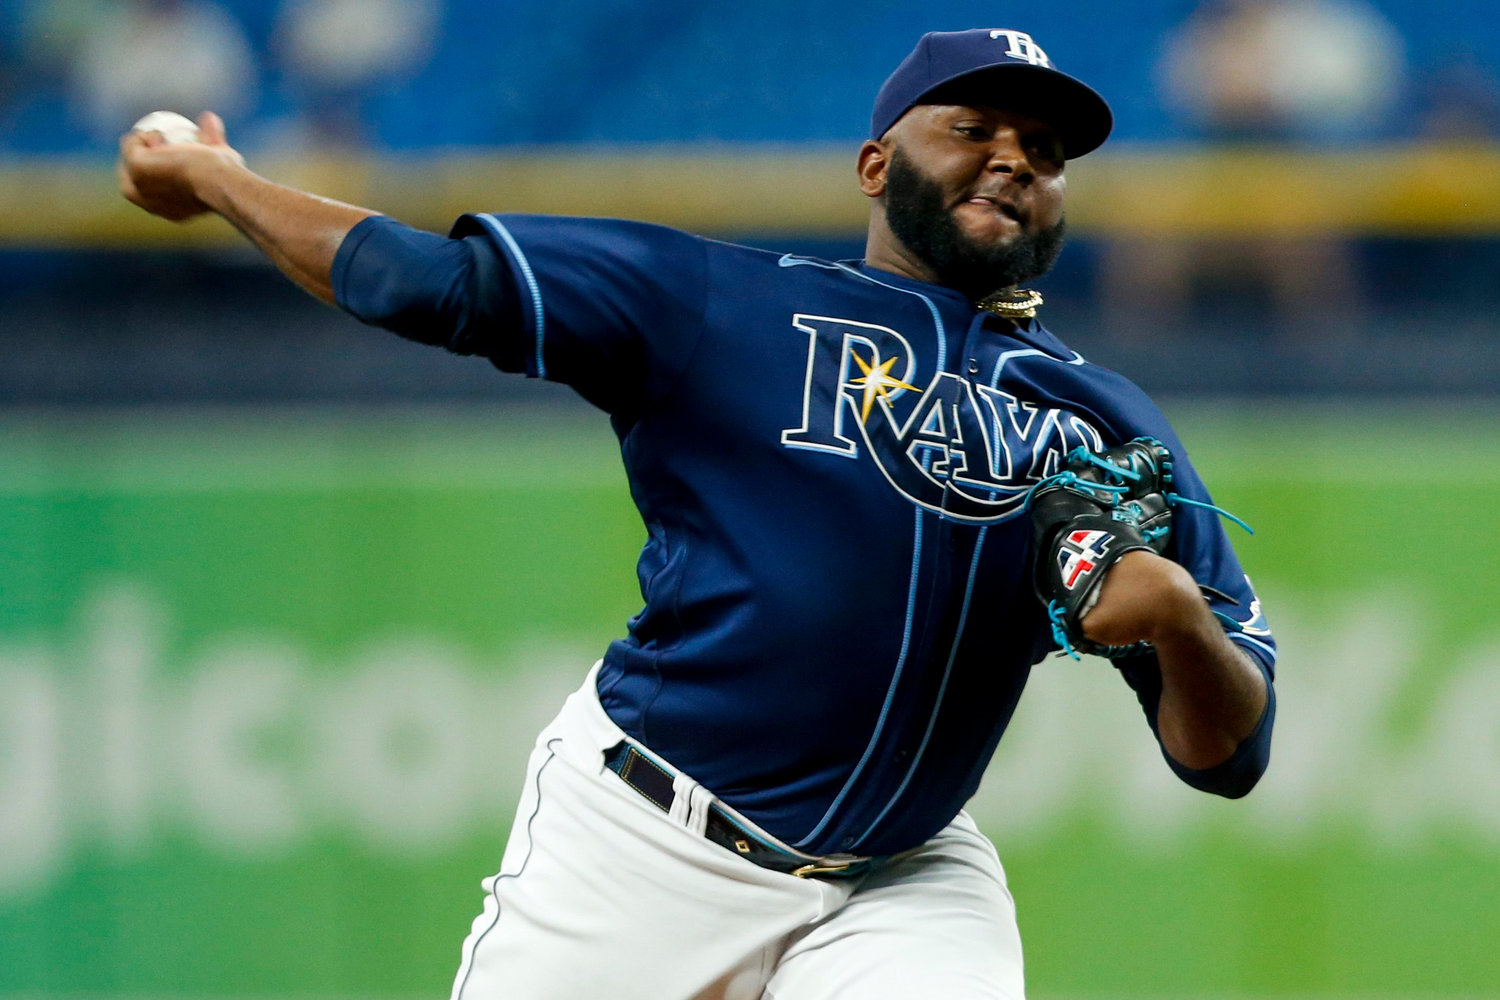 The Rays sent Diego Castillo, one of their most reliable relievers, to the Mariners for right-hander JT Chargois and infield prospect Austin Shenton.